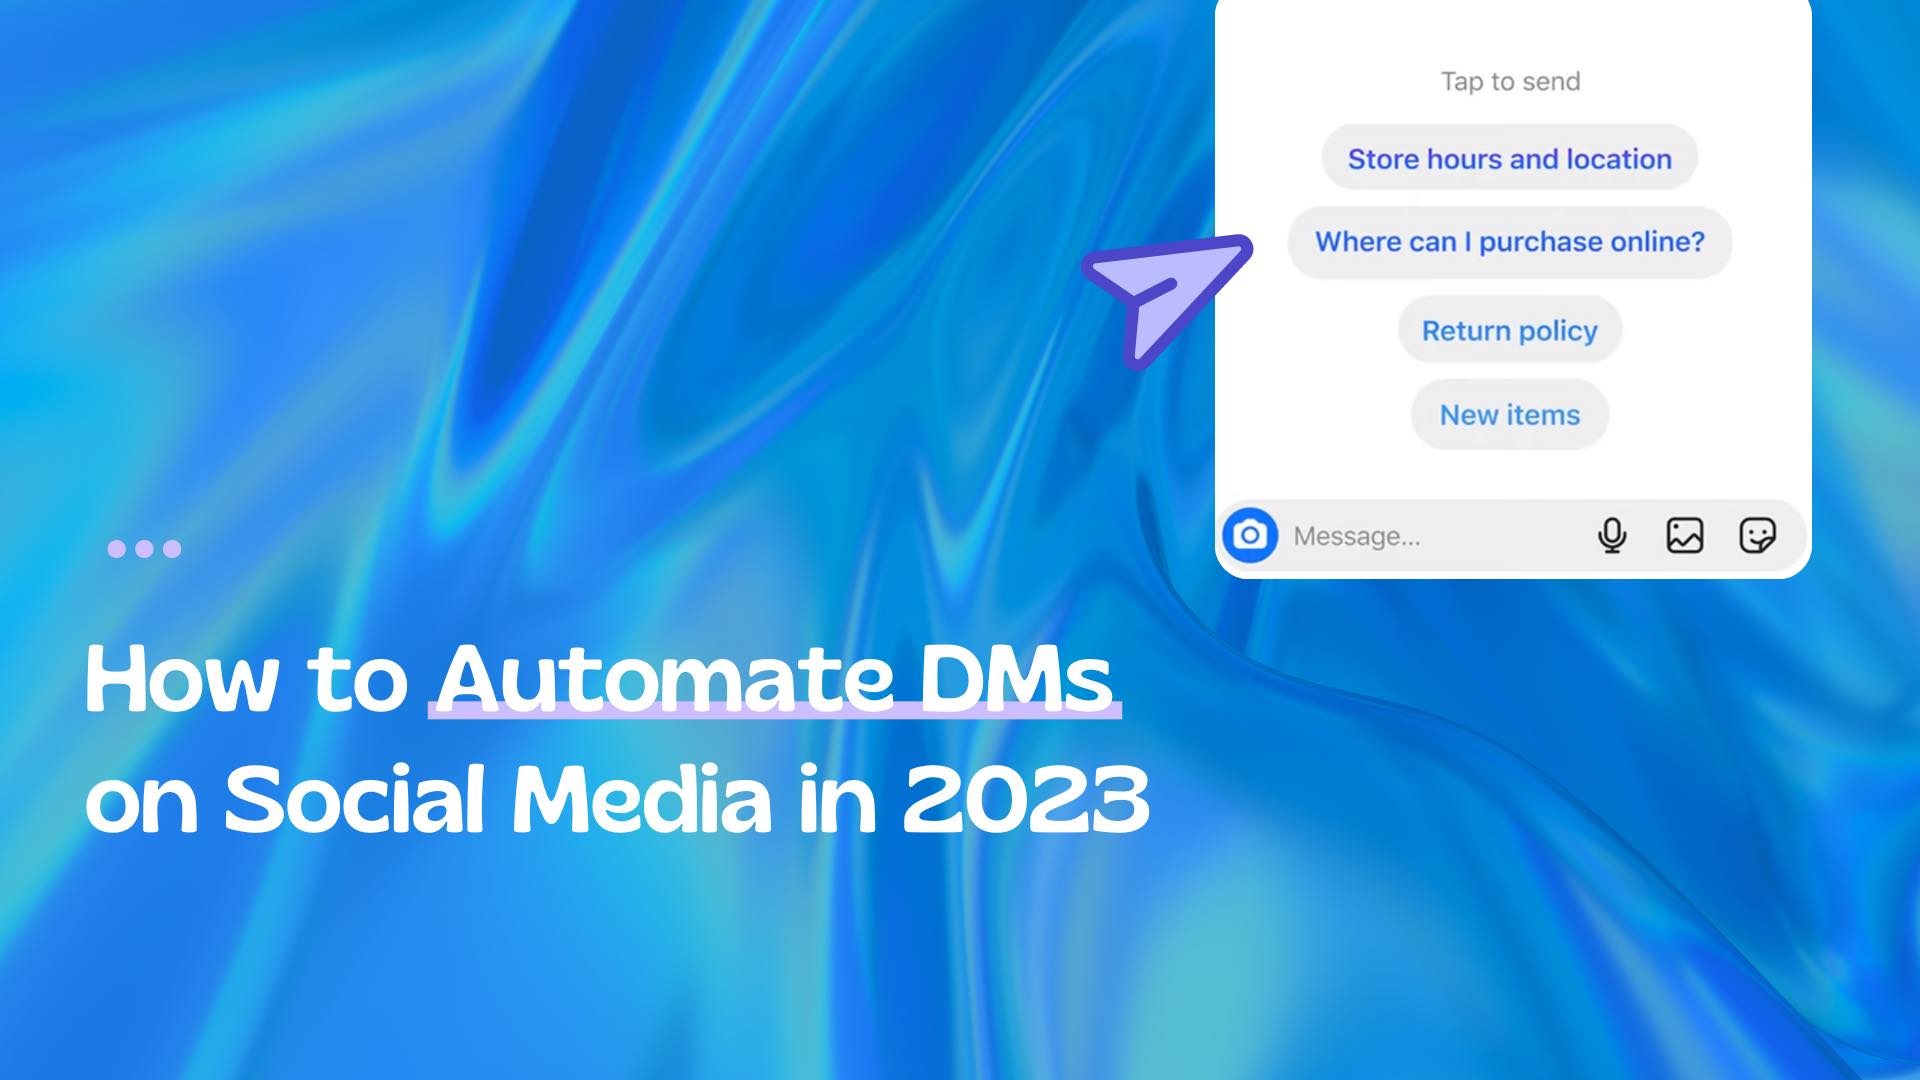 How to Automate DMs on Social Media in 2023